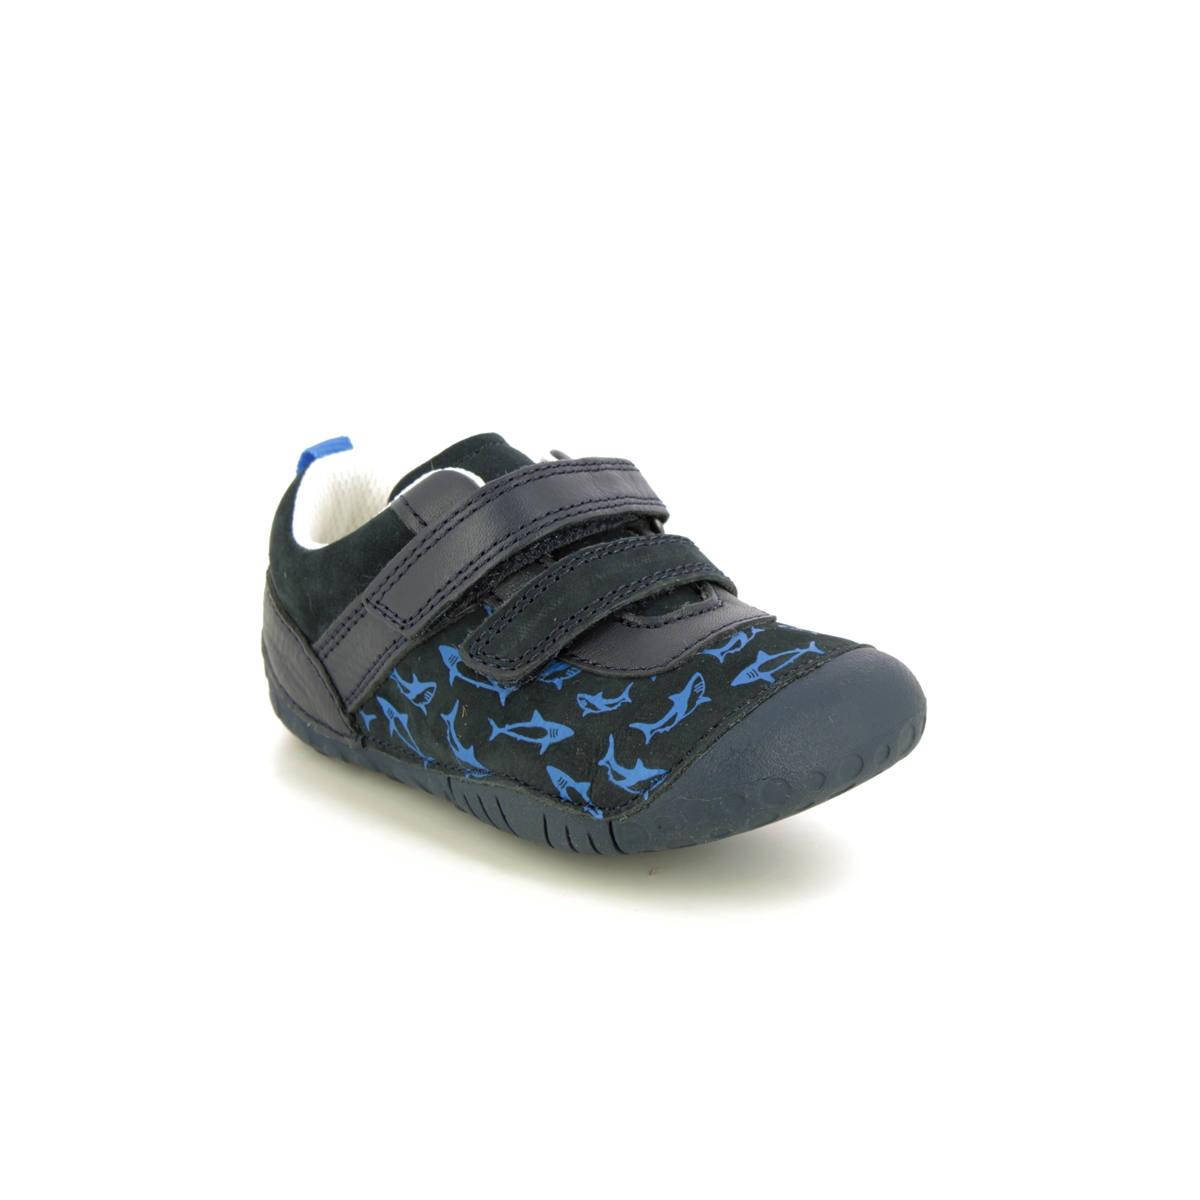 Start Rite - Little Fin In Navy Leather 0777-97G In Size 3 In Plain Navy Leather Boys First And Toddler Shoes  In Navy Leather For kids